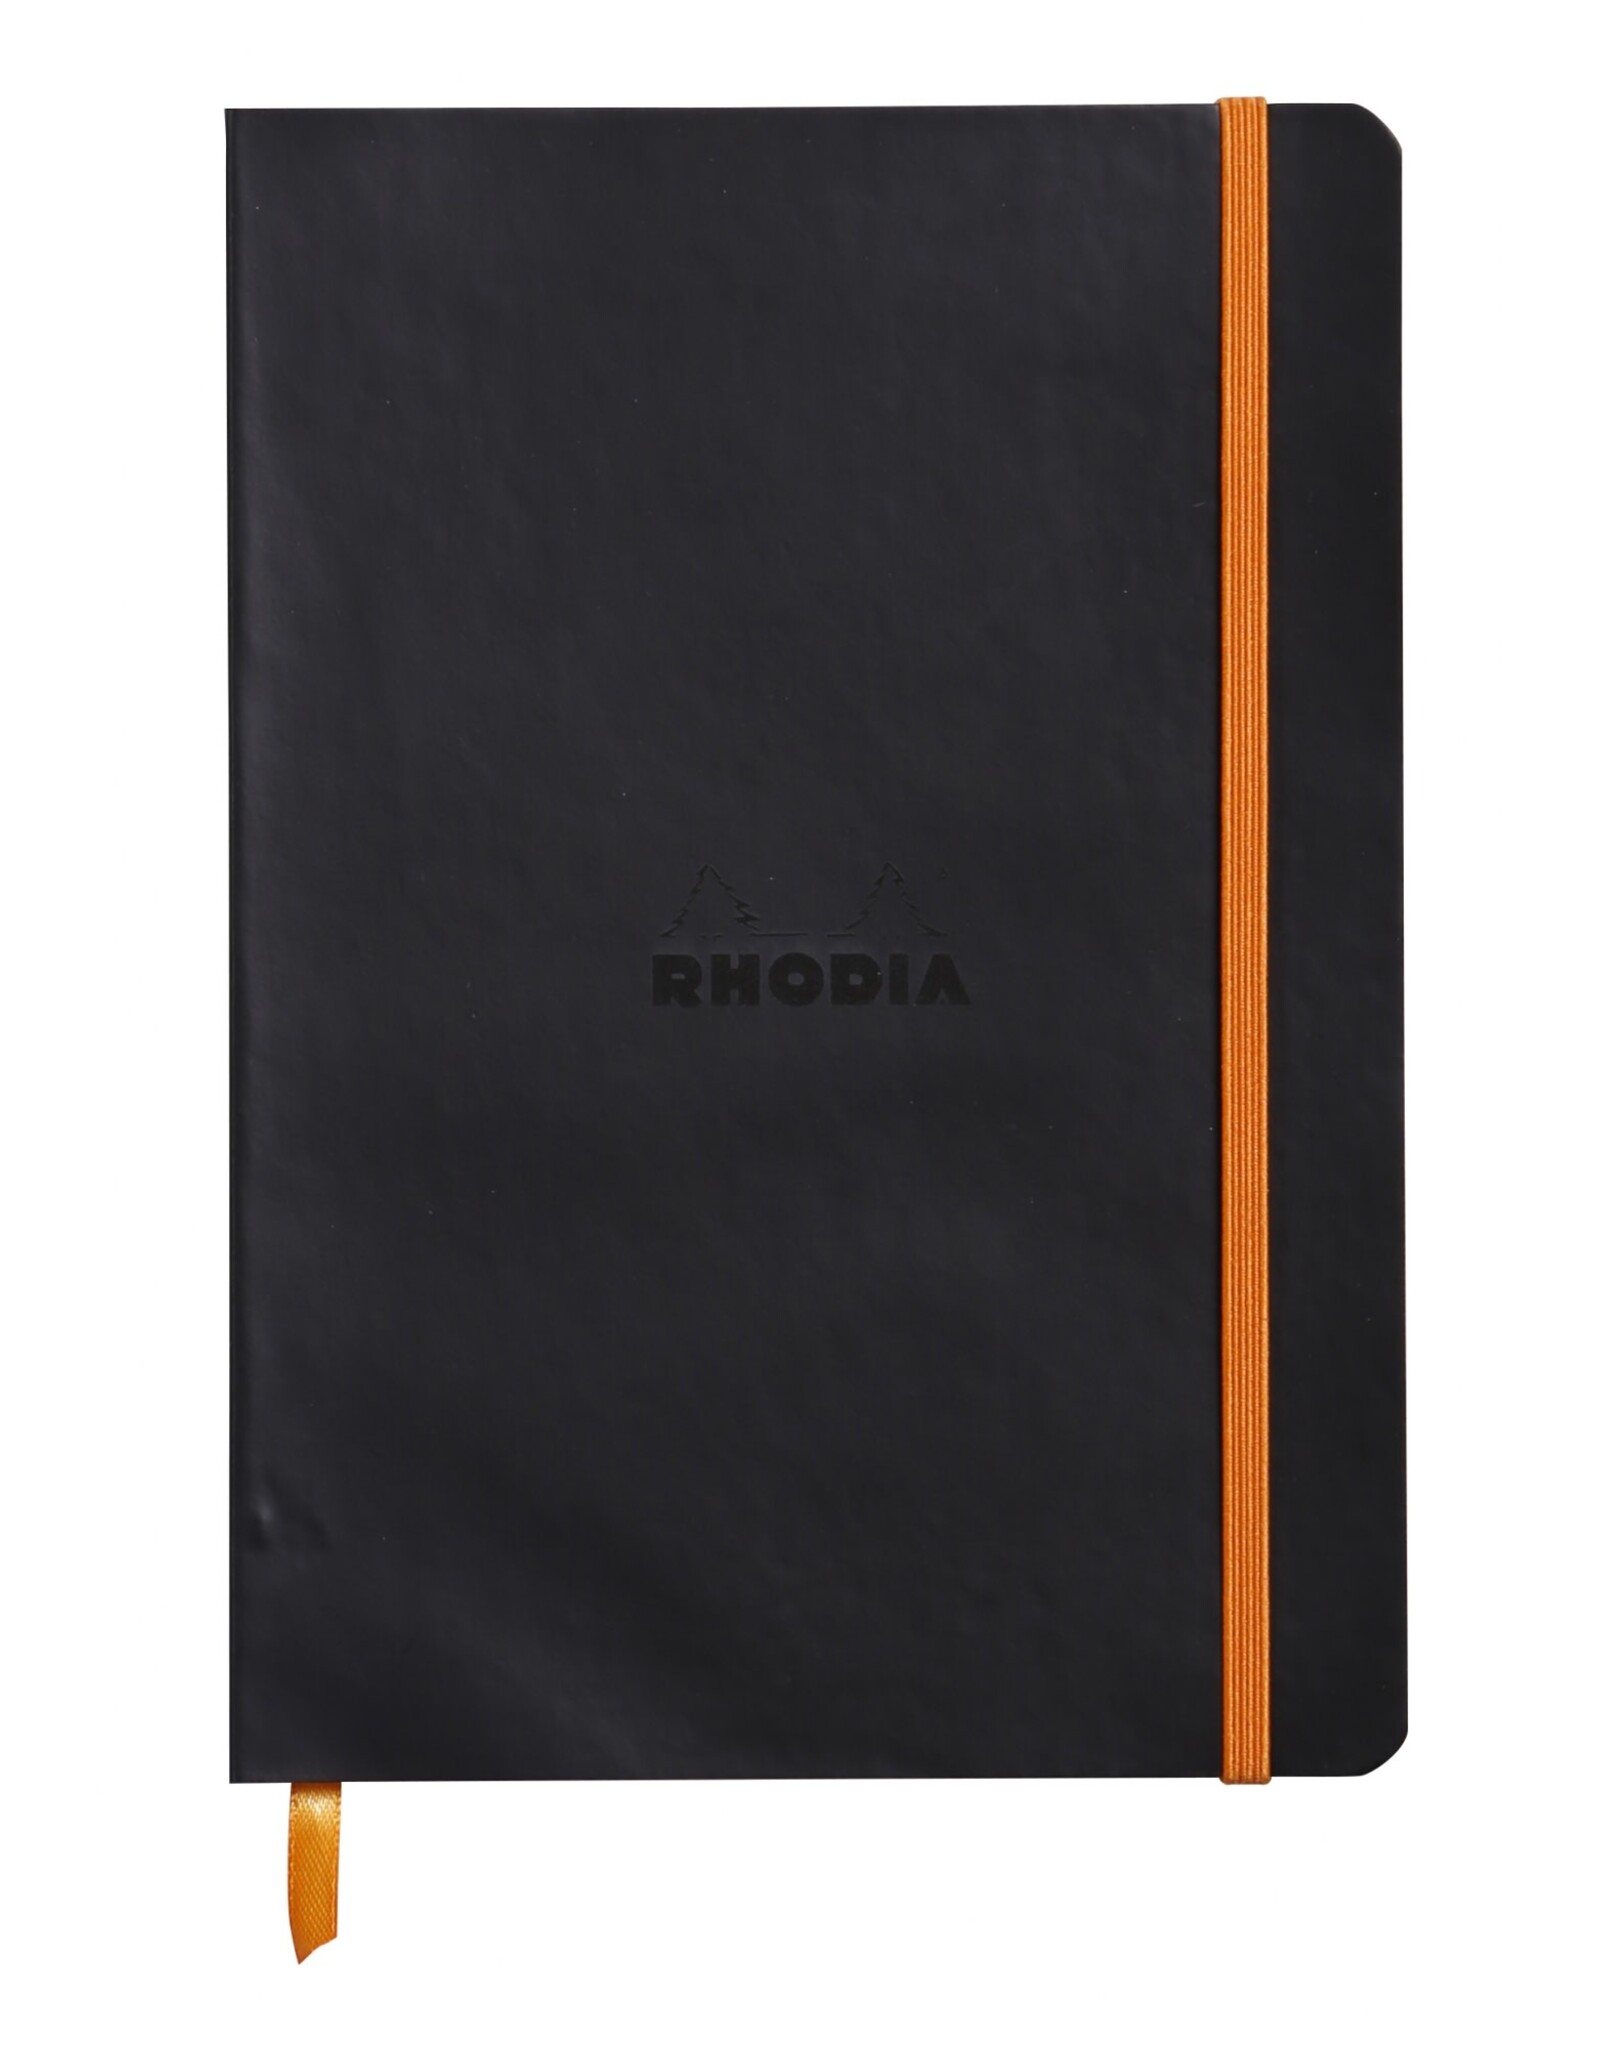 Rhodia Rhodia Rhodiarama SoftCover Notebook, 80 Dotted Sheets, 6" x 8¼”, Black